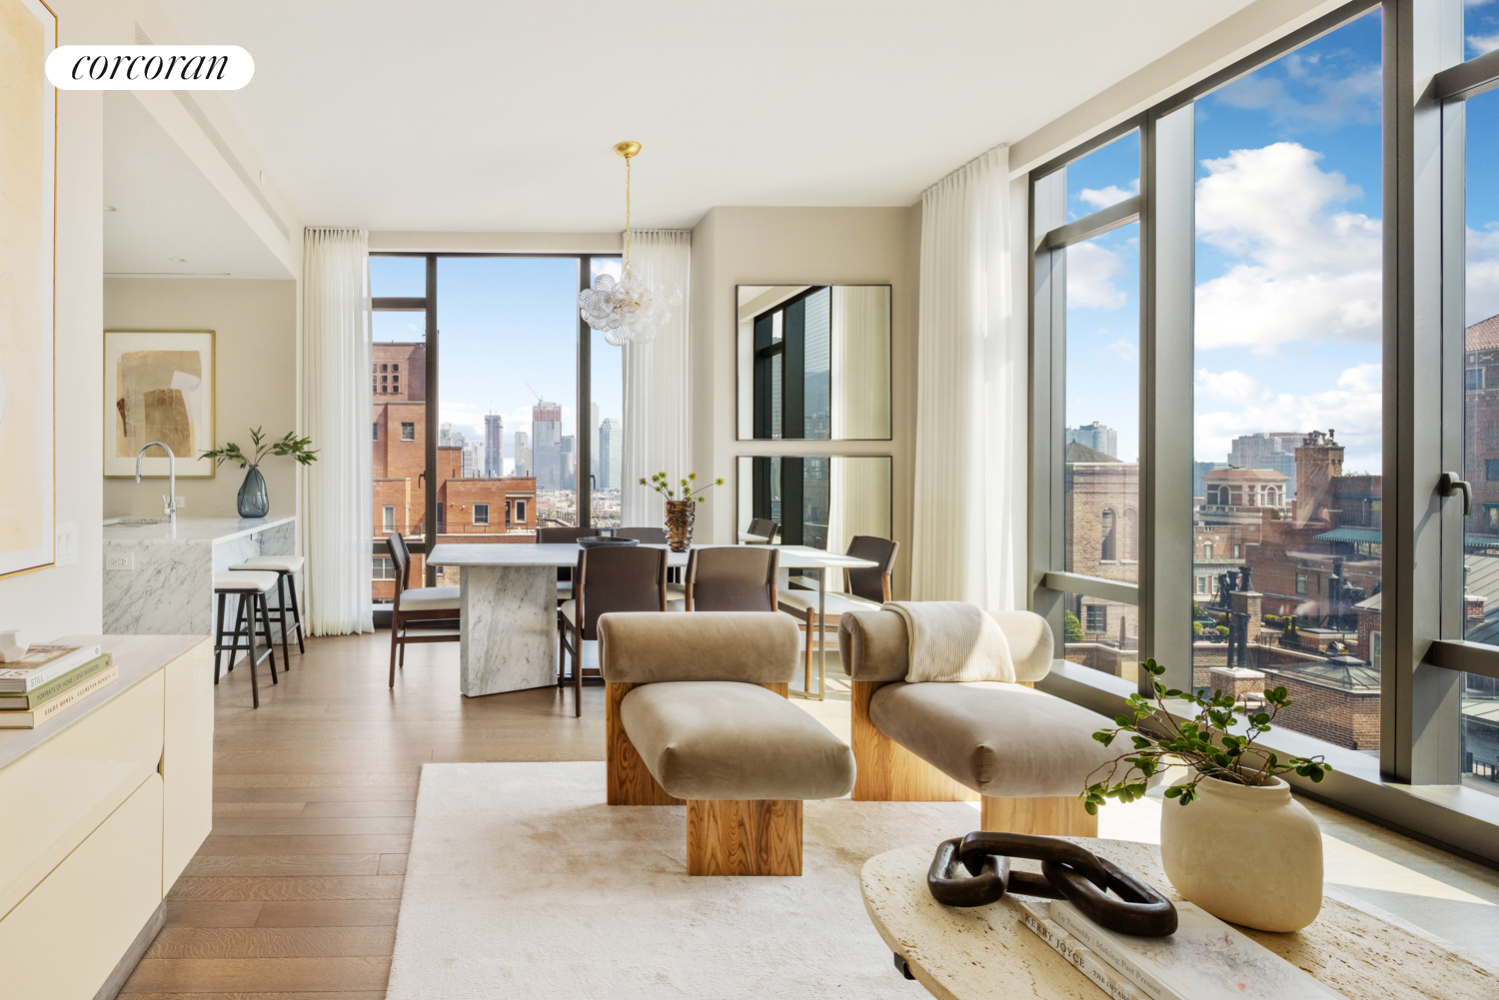 430 East 58th Street 27A, Sutton, Midtown East, NYC - 3 Bedrooms  
3.5 Bathrooms  
5 Rooms - 